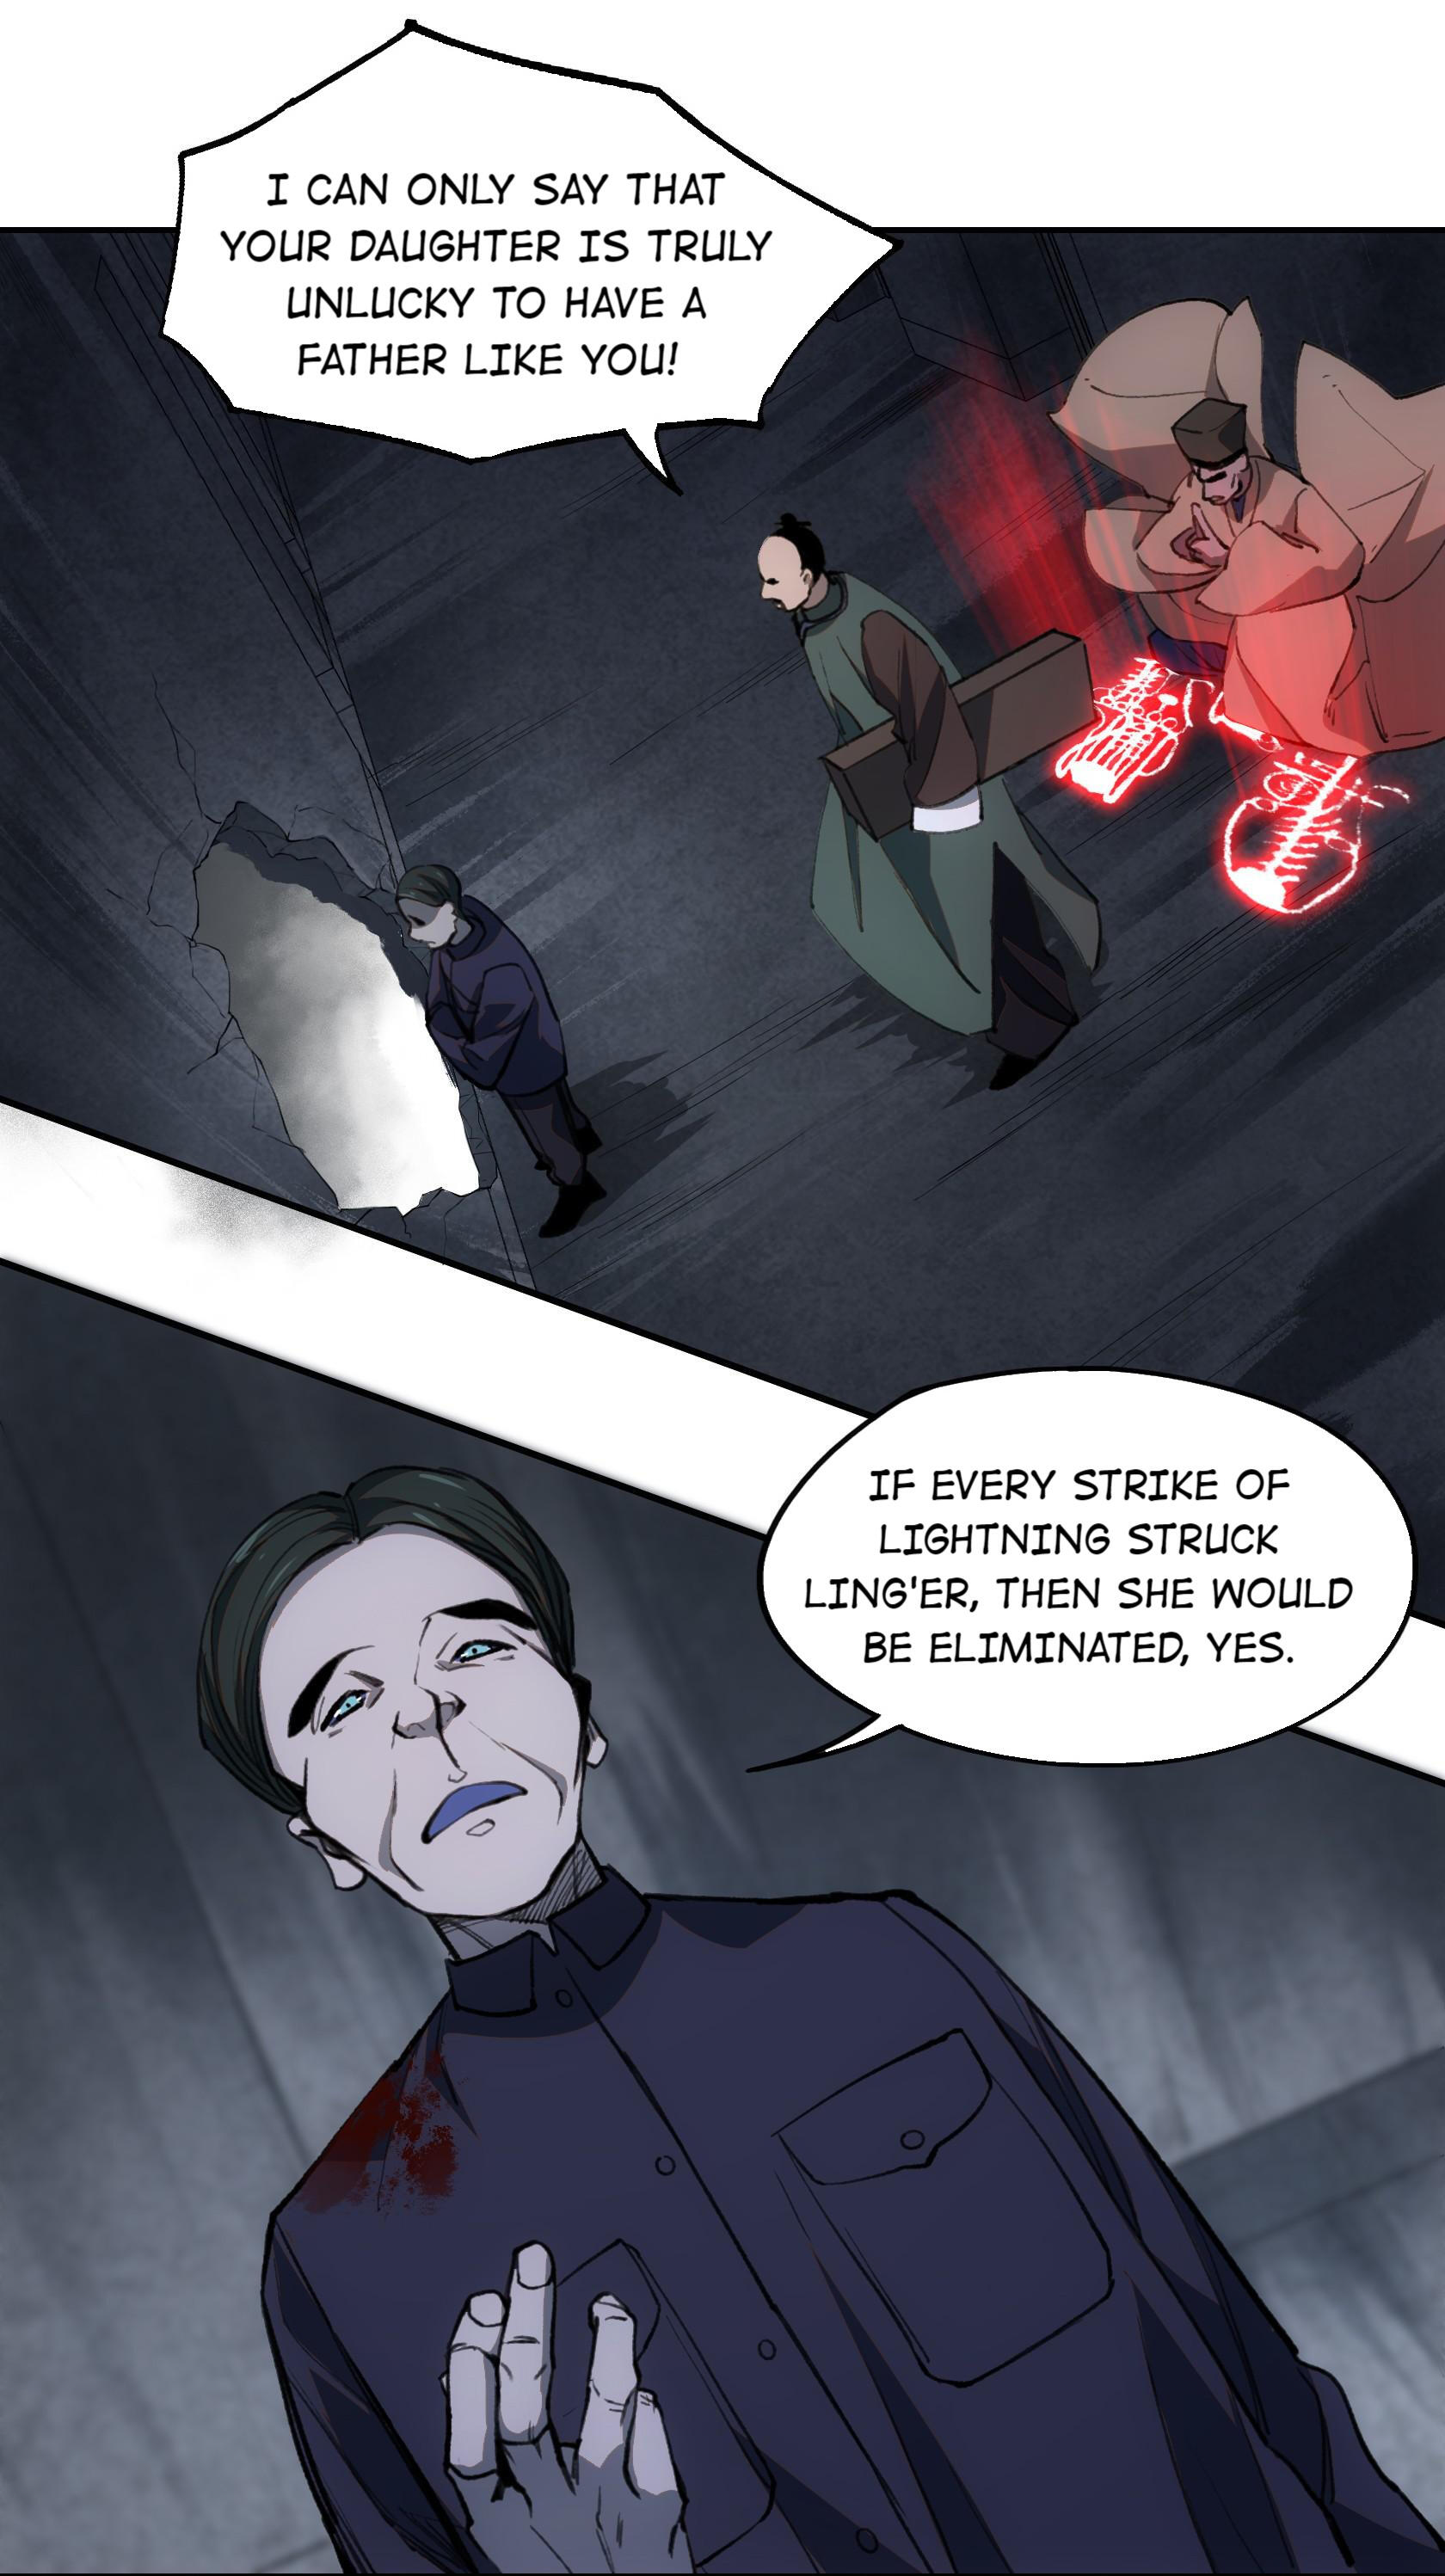 Beholder of the Abyss Chapter 33-eng-li - Page 64